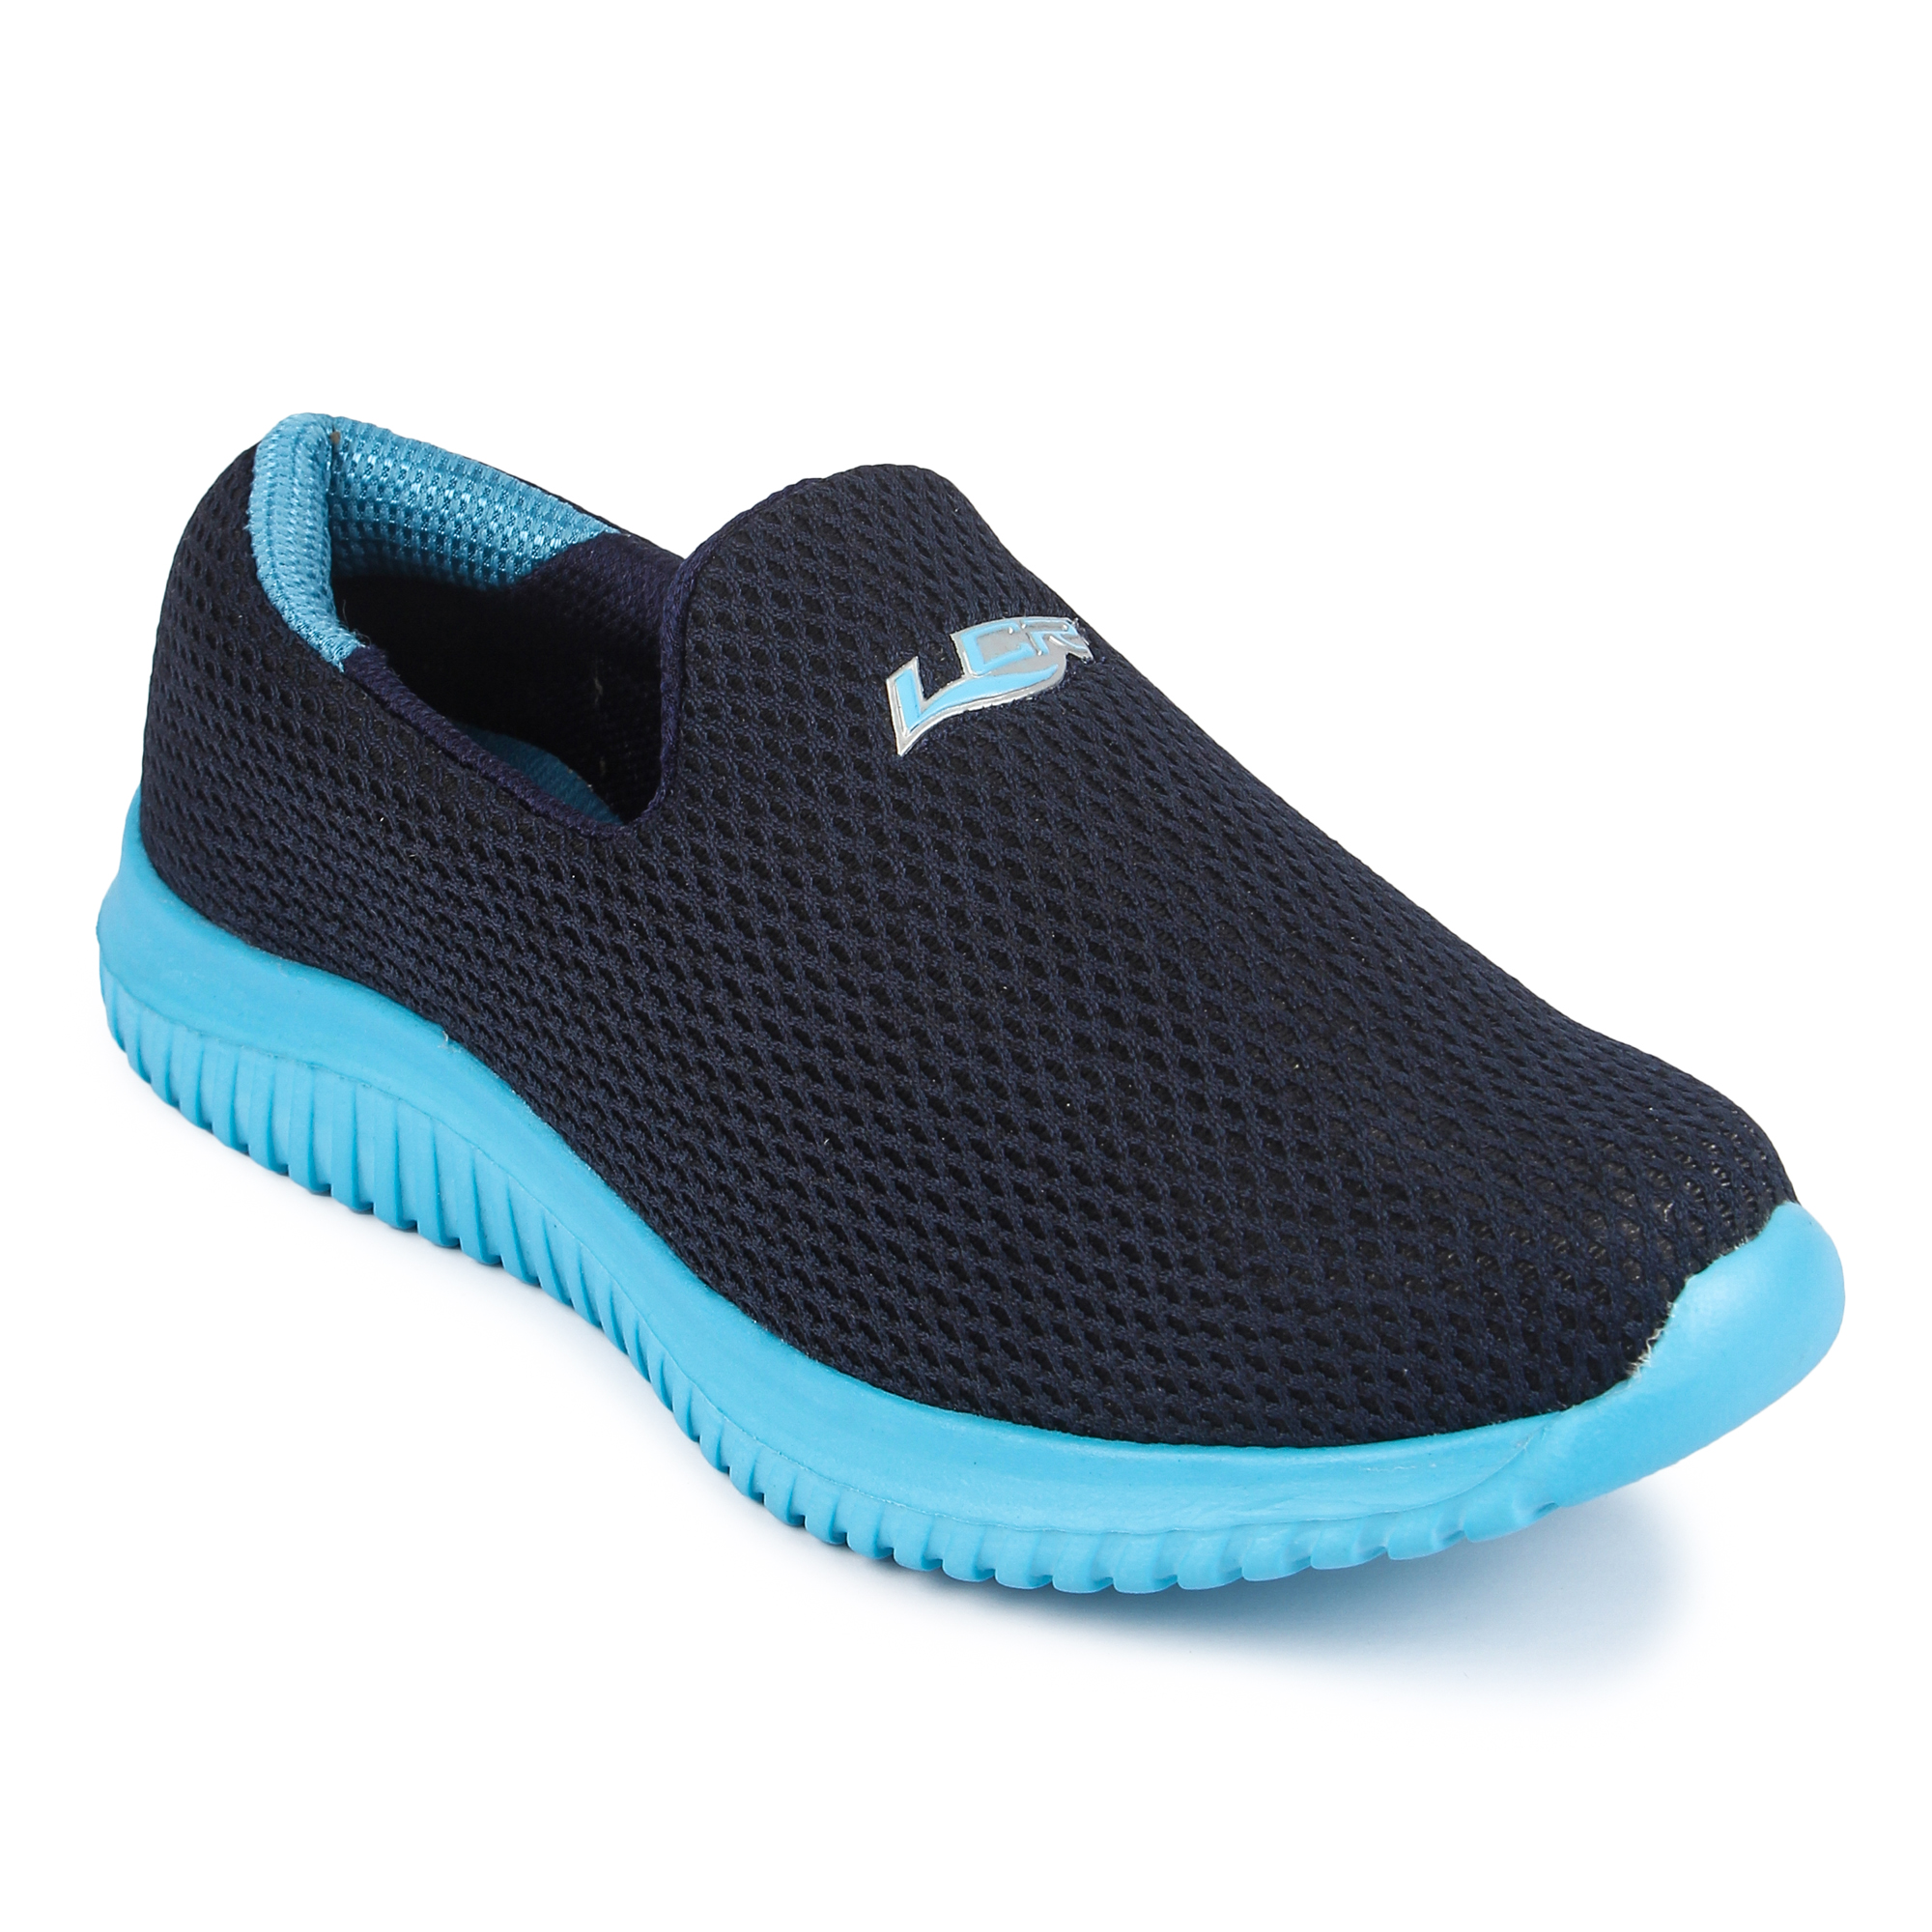 Buy Lancer Women's Blue Sports Shoes Online @ ₹499 from ShopClues